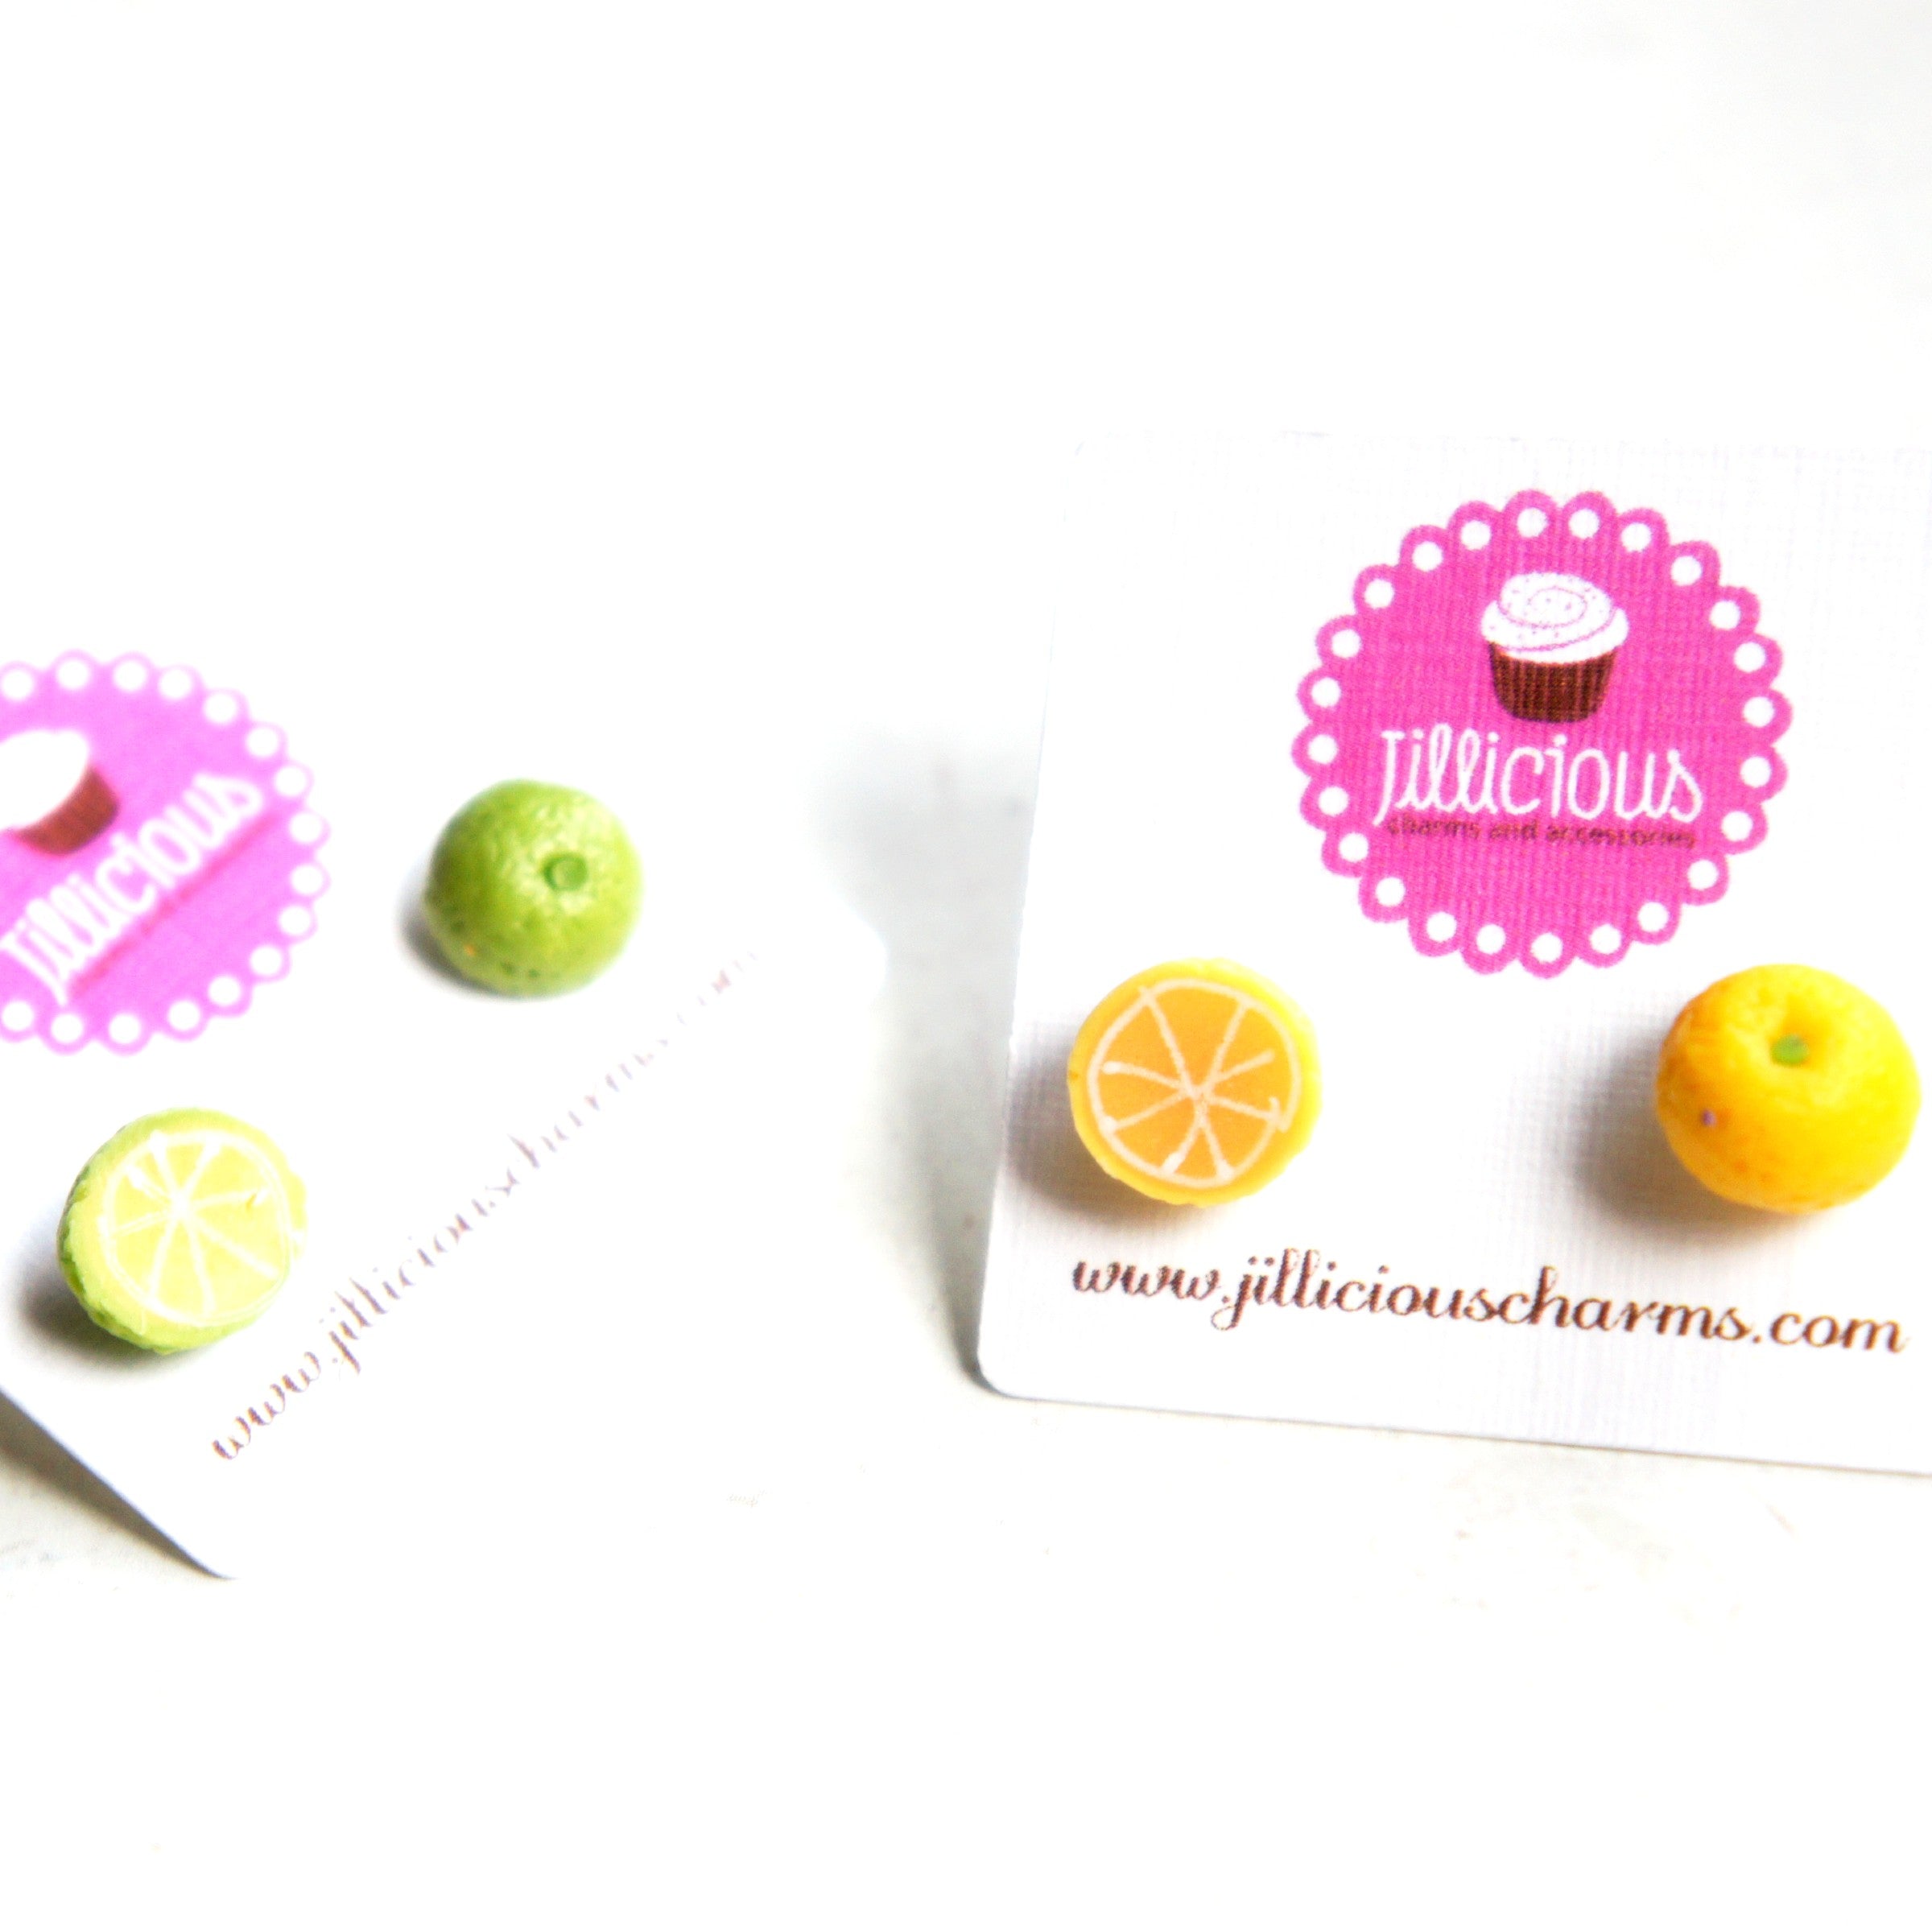 Lemon and Lime Stud Earrings - Jillicious charms and accessories